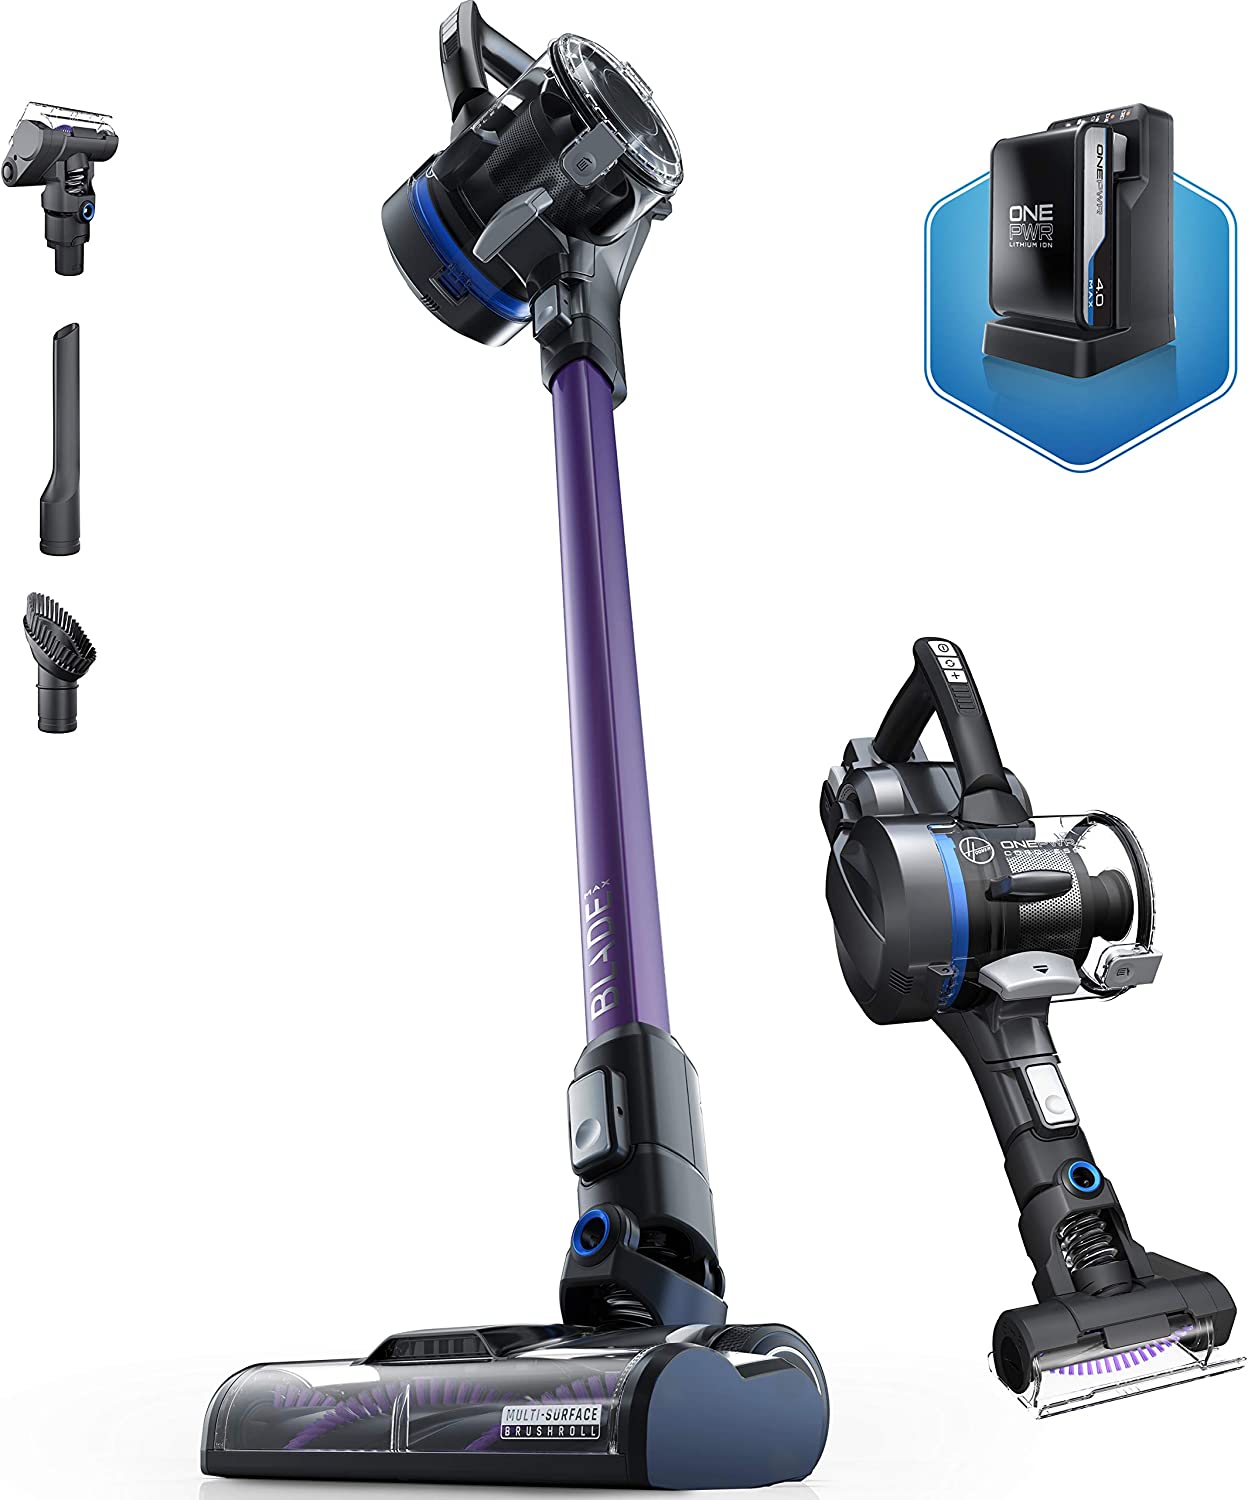 Hoover ONEPWR Blade Max Pet Cordless Stick Vacuum Cleaner (BH53354V, Purple) $200 + Free Shipping